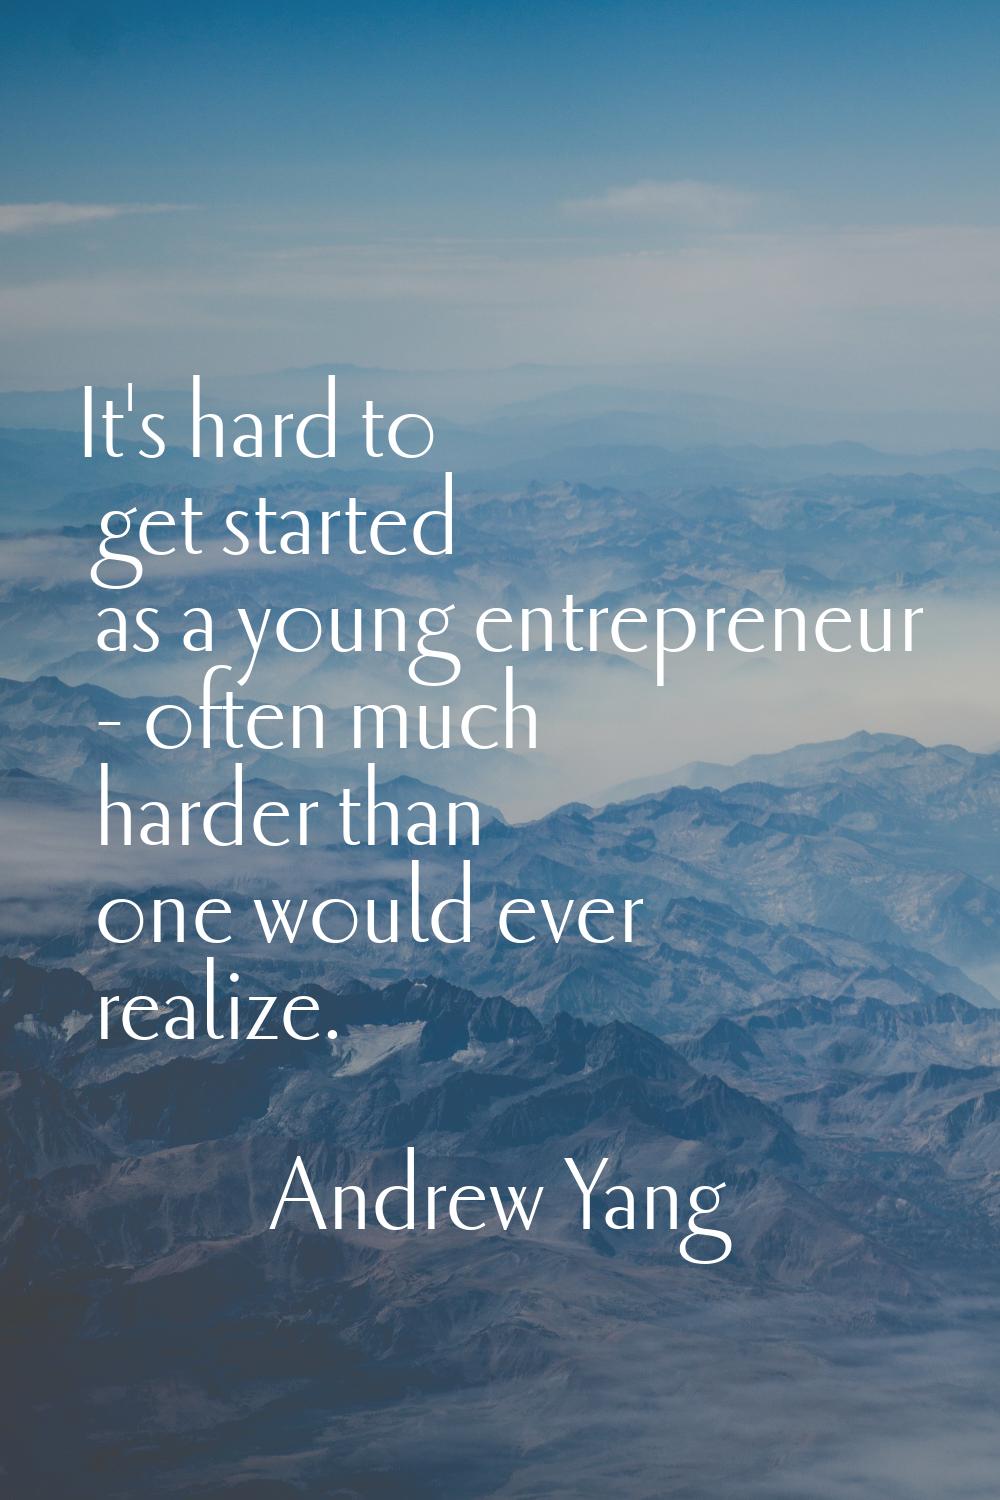 It's hard to get started as a young entrepreneur - often much harder than one would ever realize.